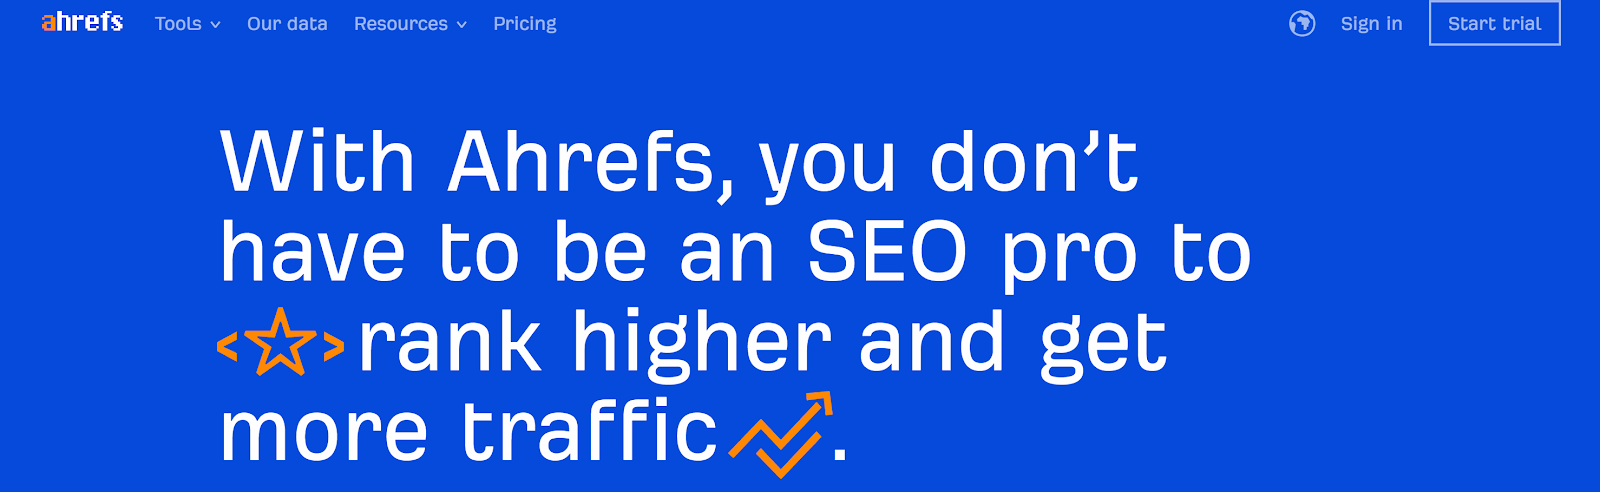 ahrefs is a premier seo research tool